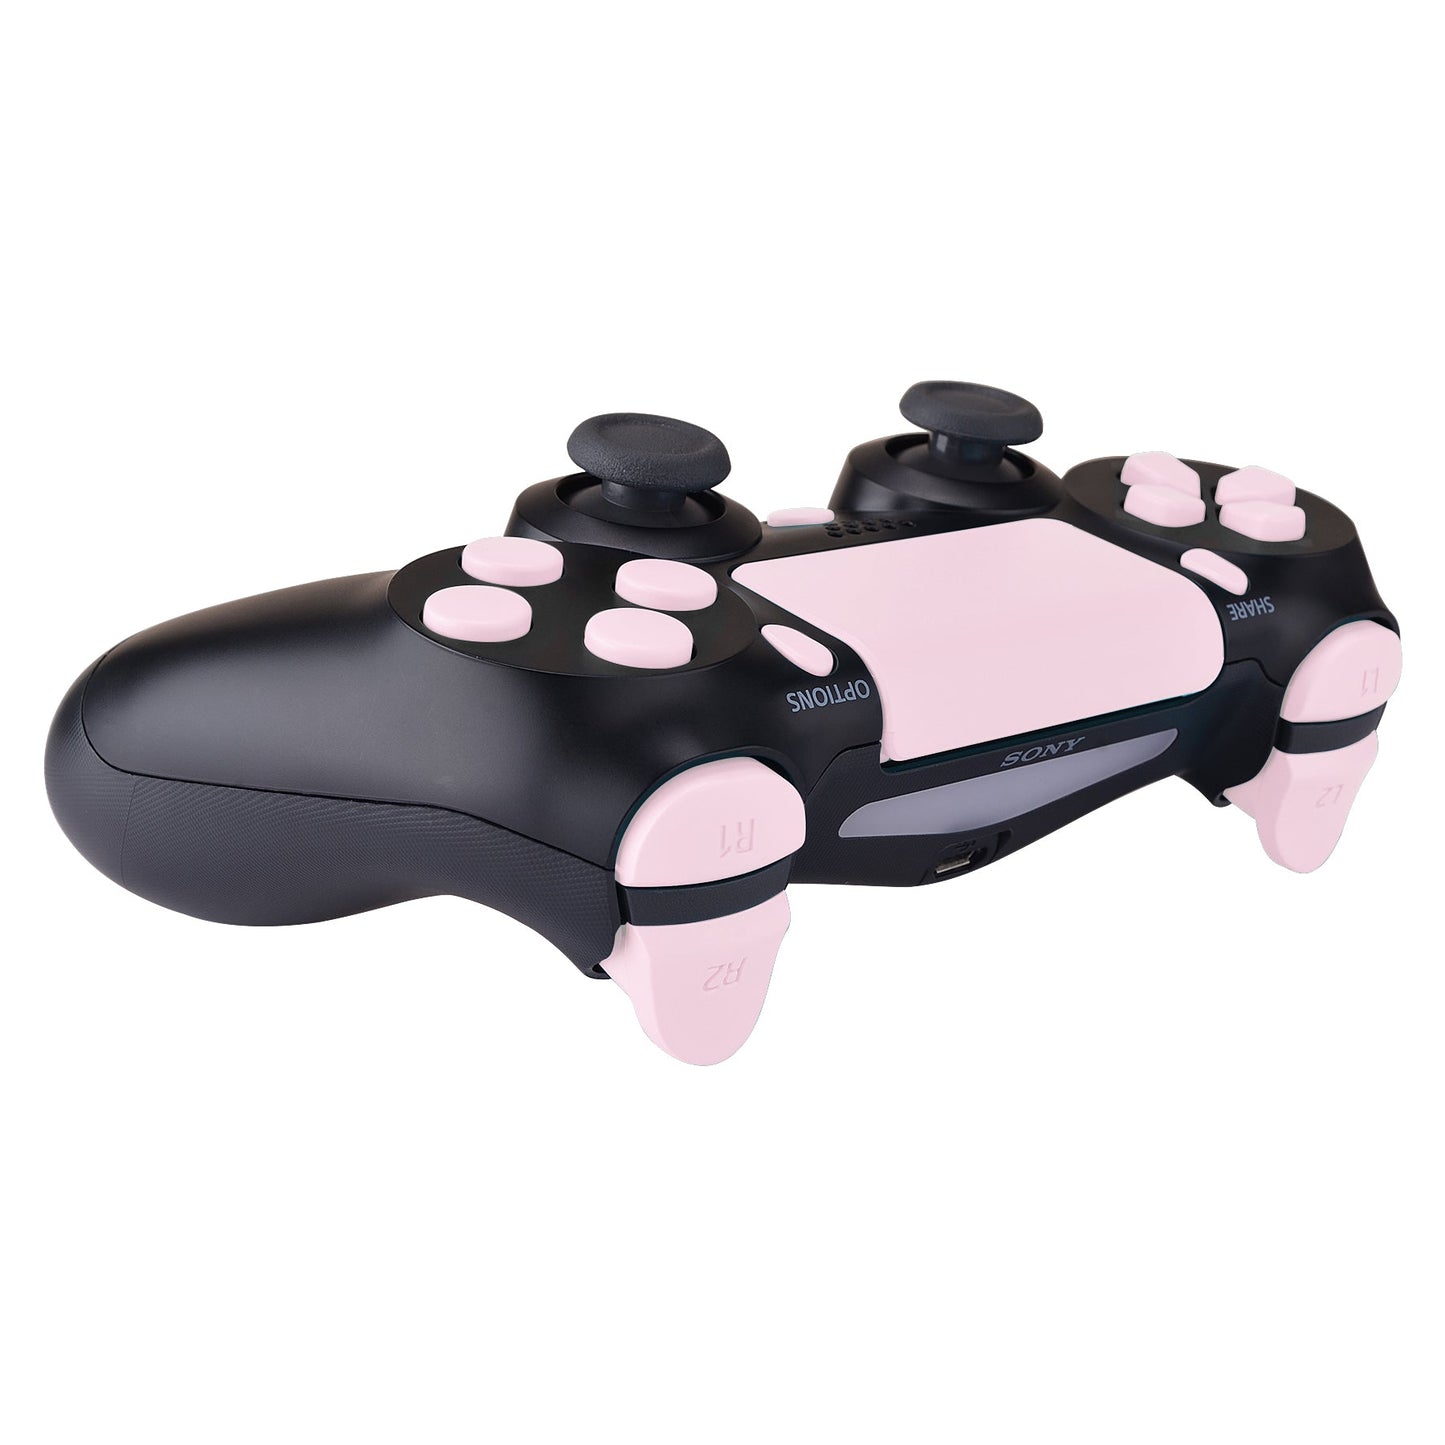 Buttons Touchpad eXtremeRate Controller for Pink Repair Full Kit – Triggers D-pad Pro ps4 Blossoms for Home eXtremeRate Controller, L2 Action Replacement R2 Buttons Options Cherry Slim Set ps4 R1 L1 Share